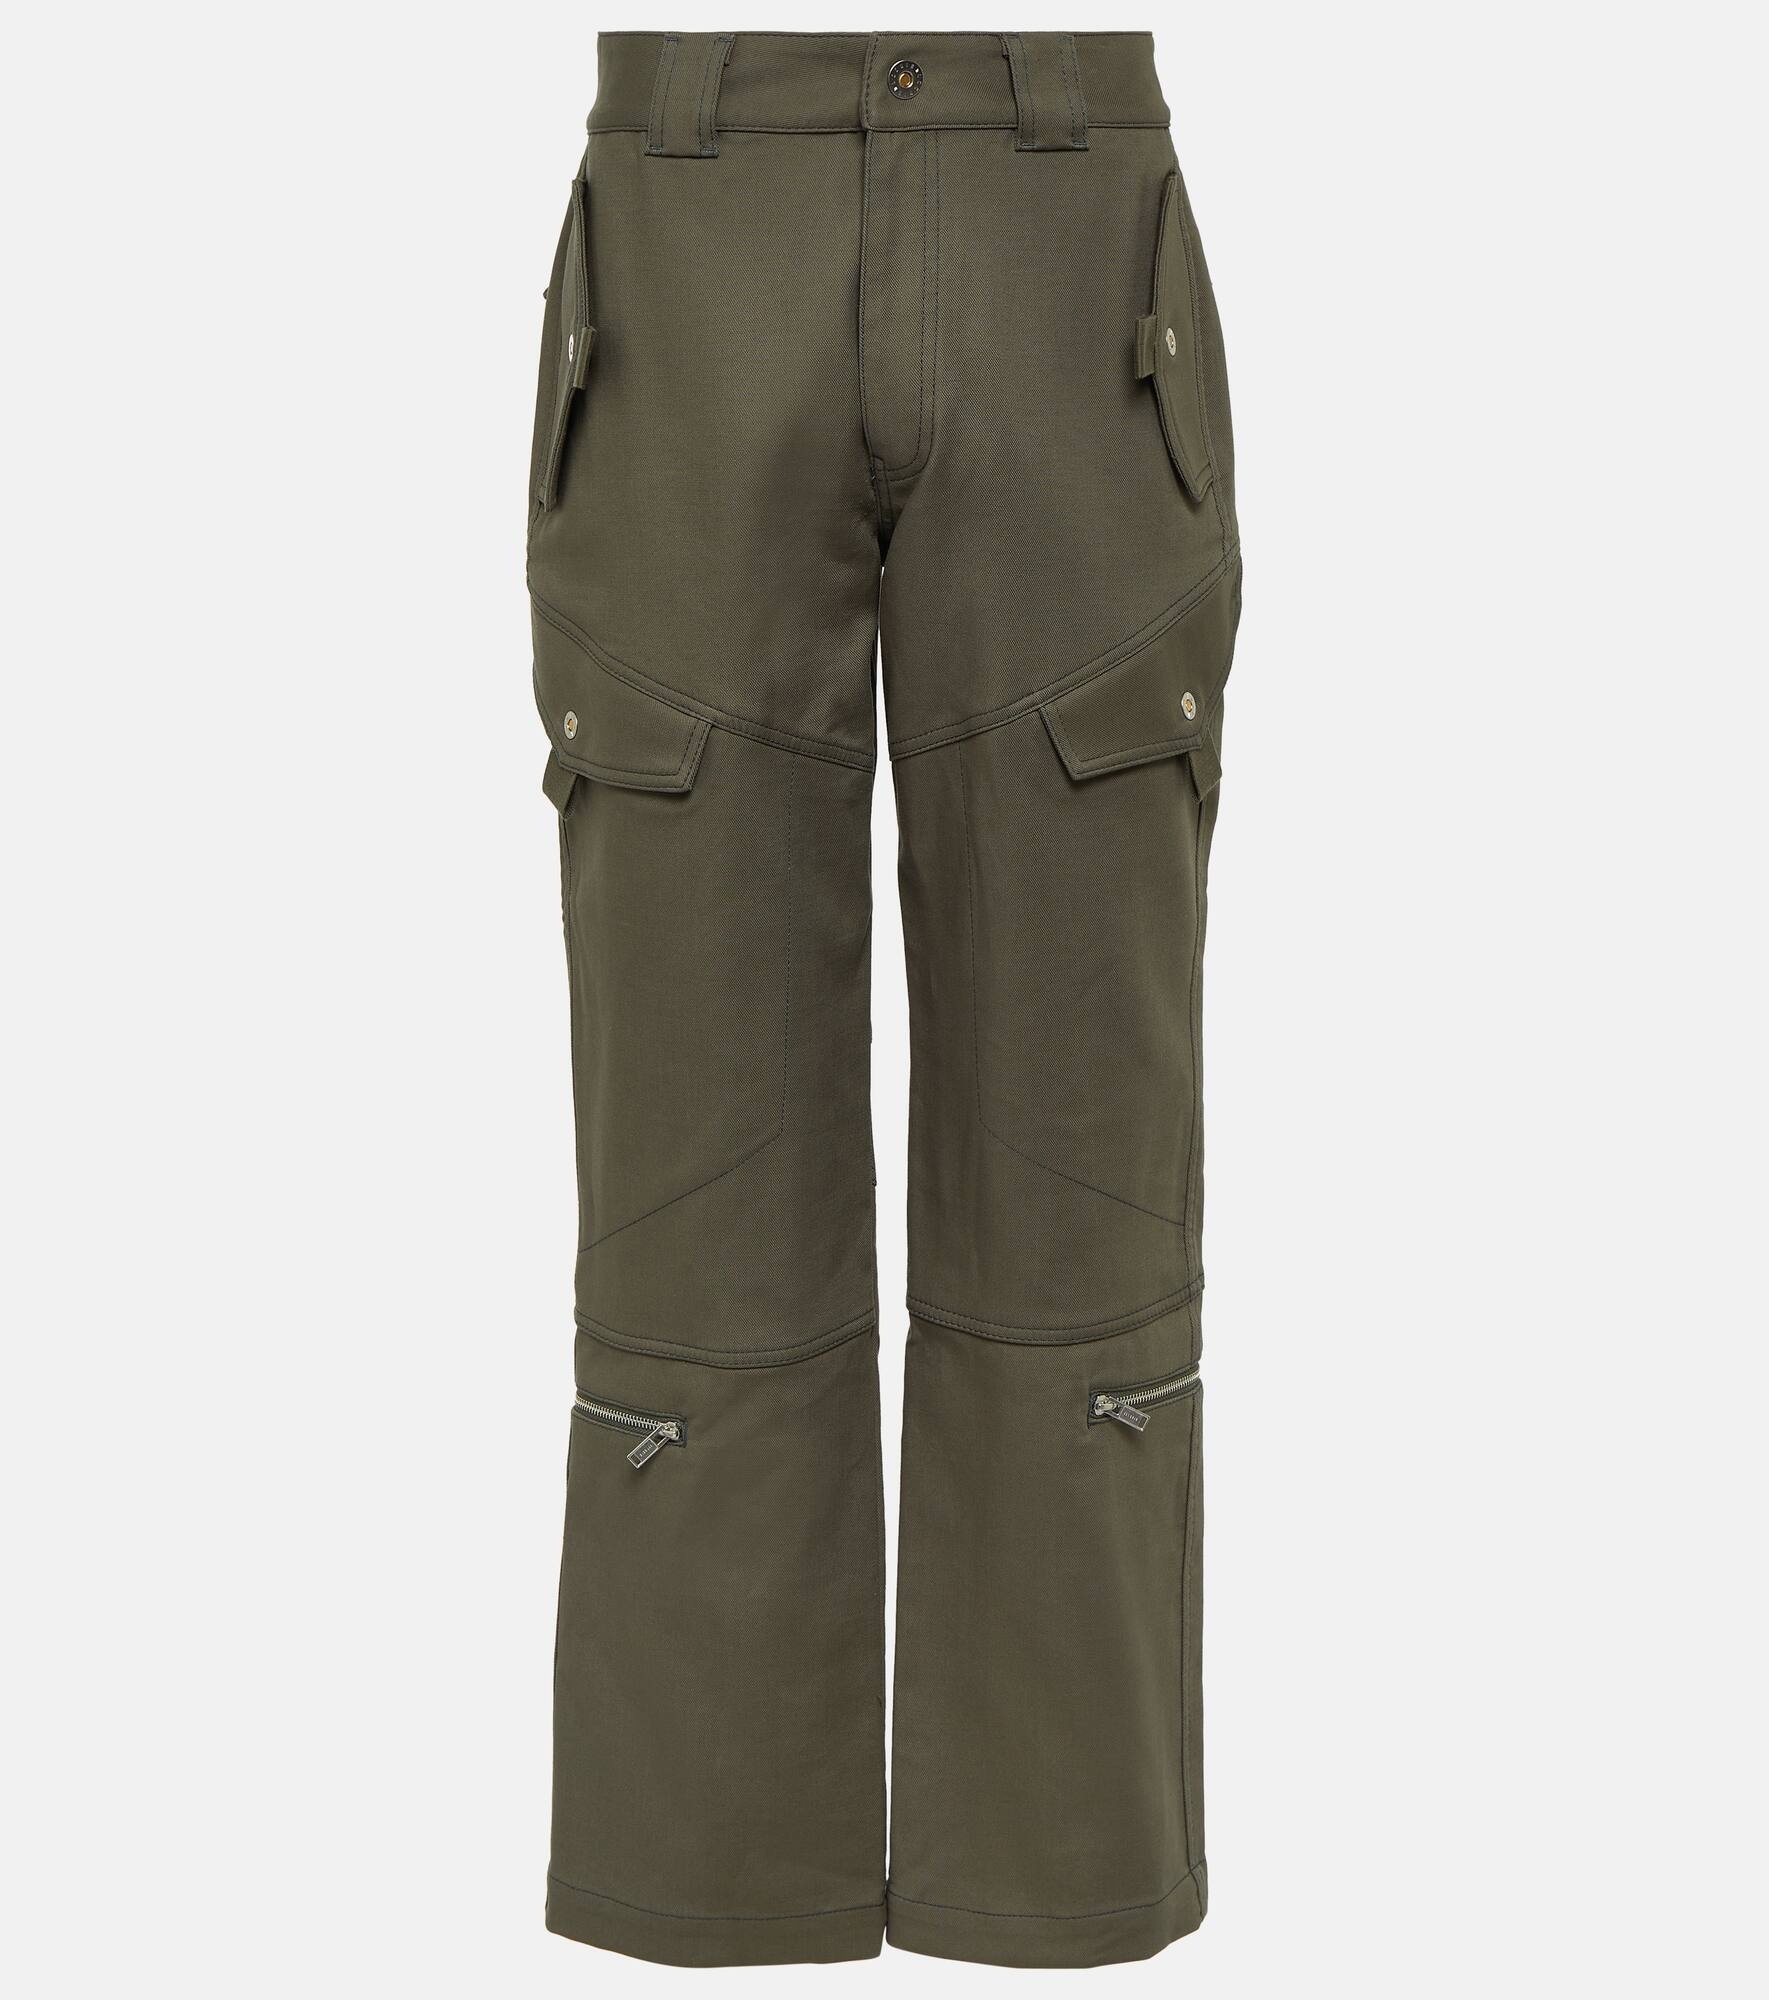 Mid-rise cotton twill cargo pants - 1